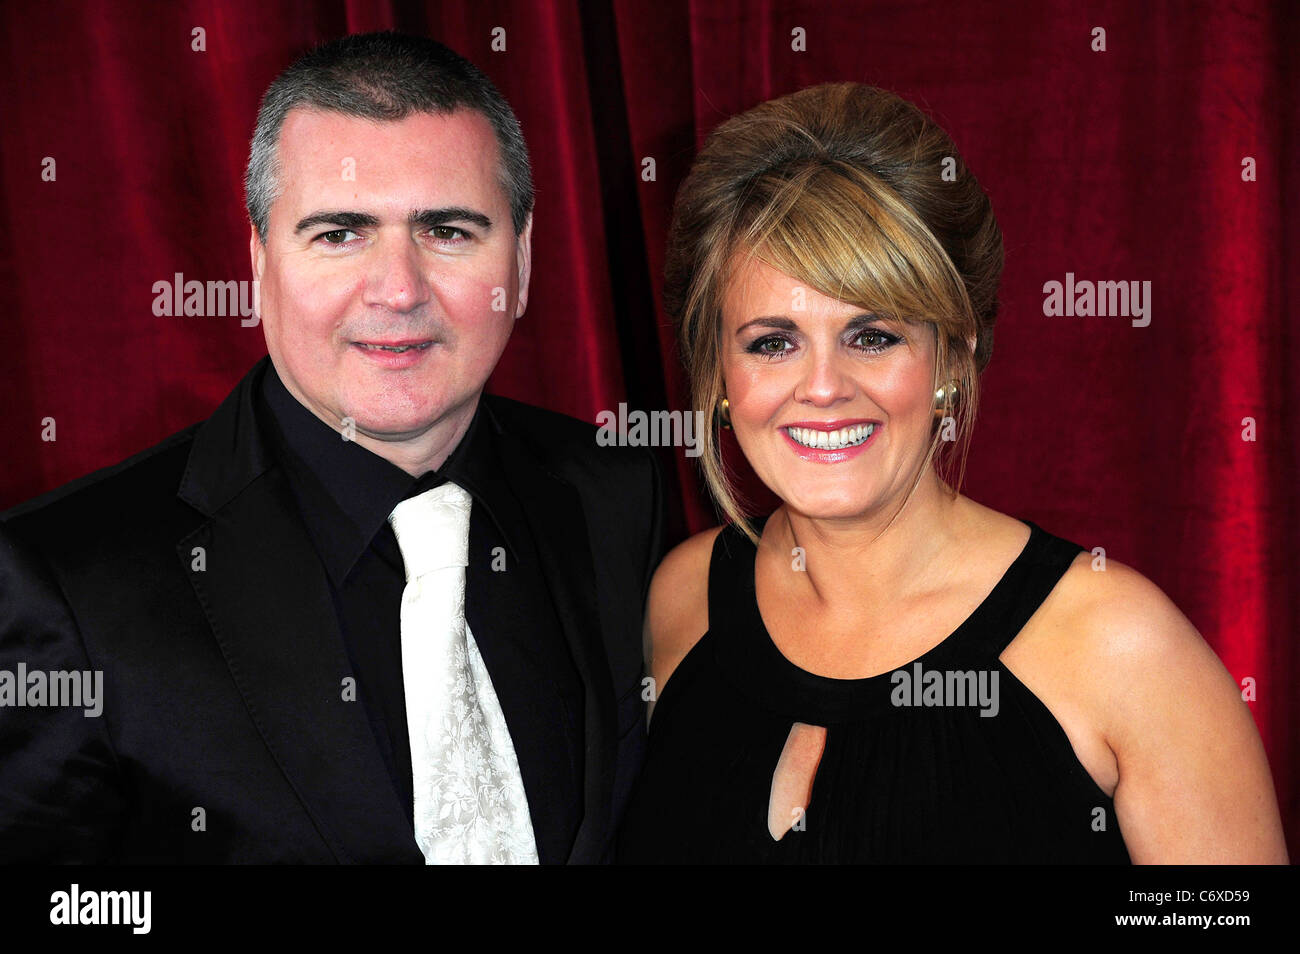 Sally Lindsay; Steve White attends the 2010 British Soap Awards held at the London Television Centre London, England - 09.05.10 Stock Photo